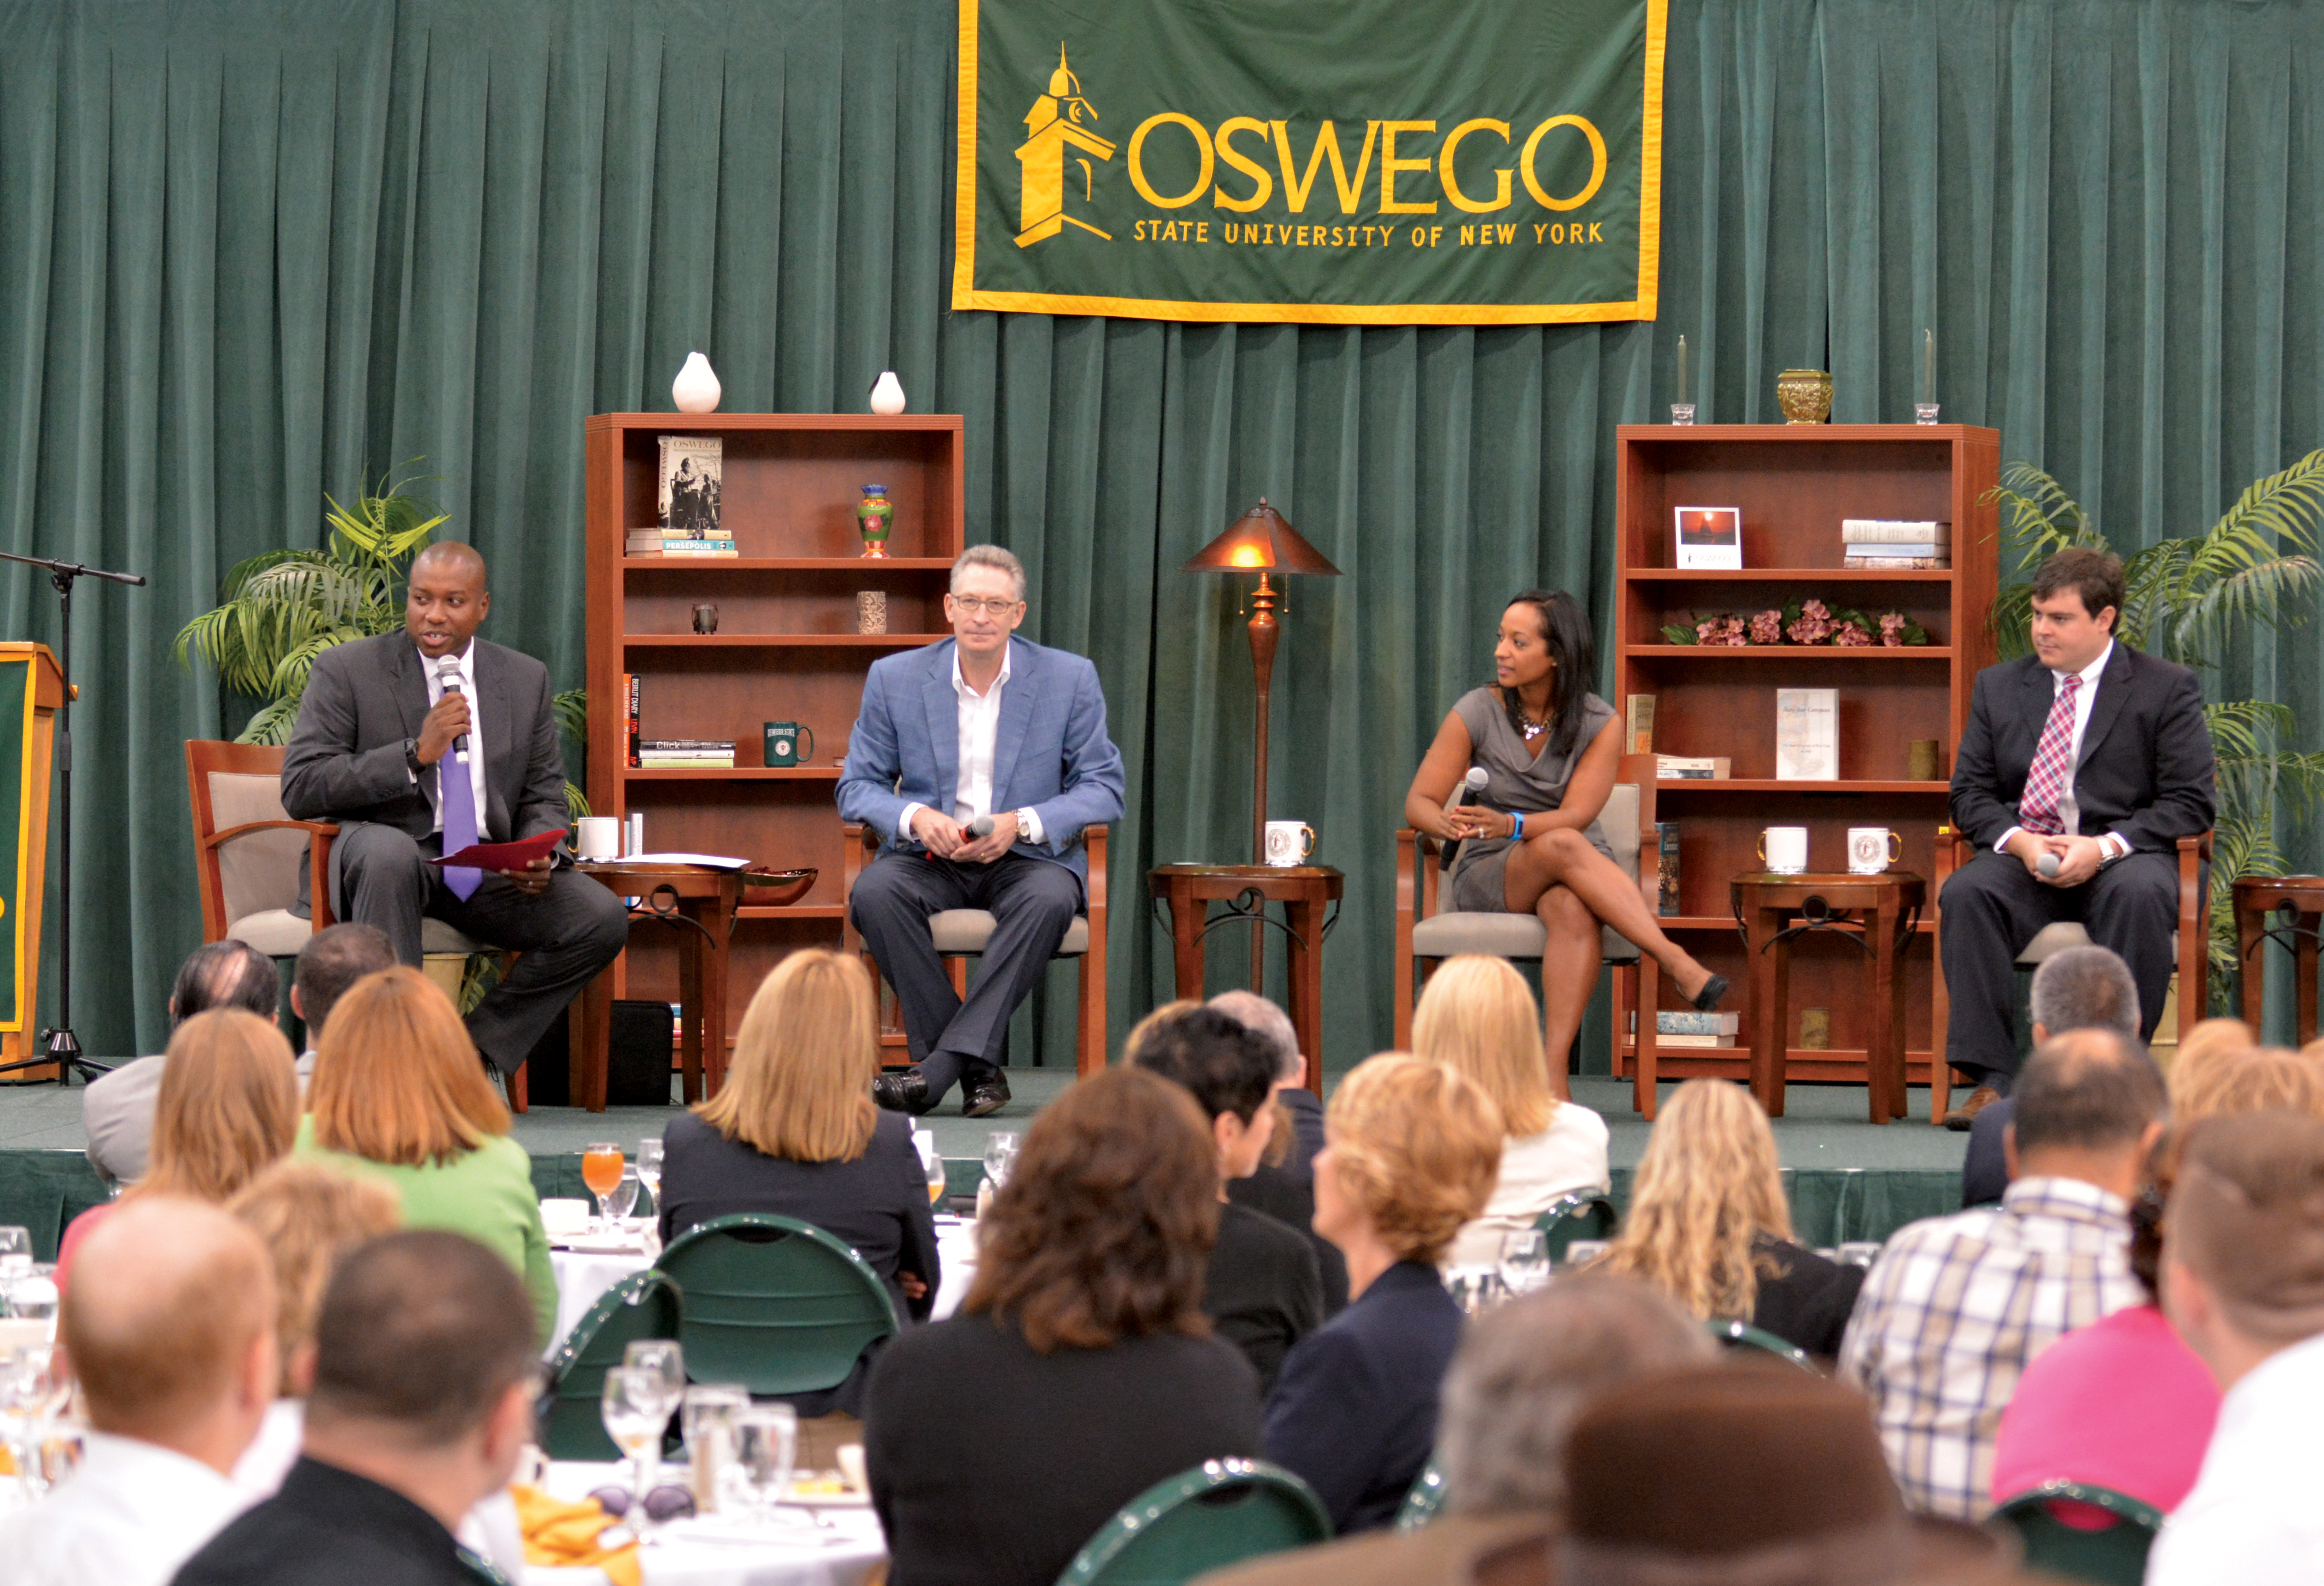 Panel discussion at President's opening breakfast at SUNY Oswego